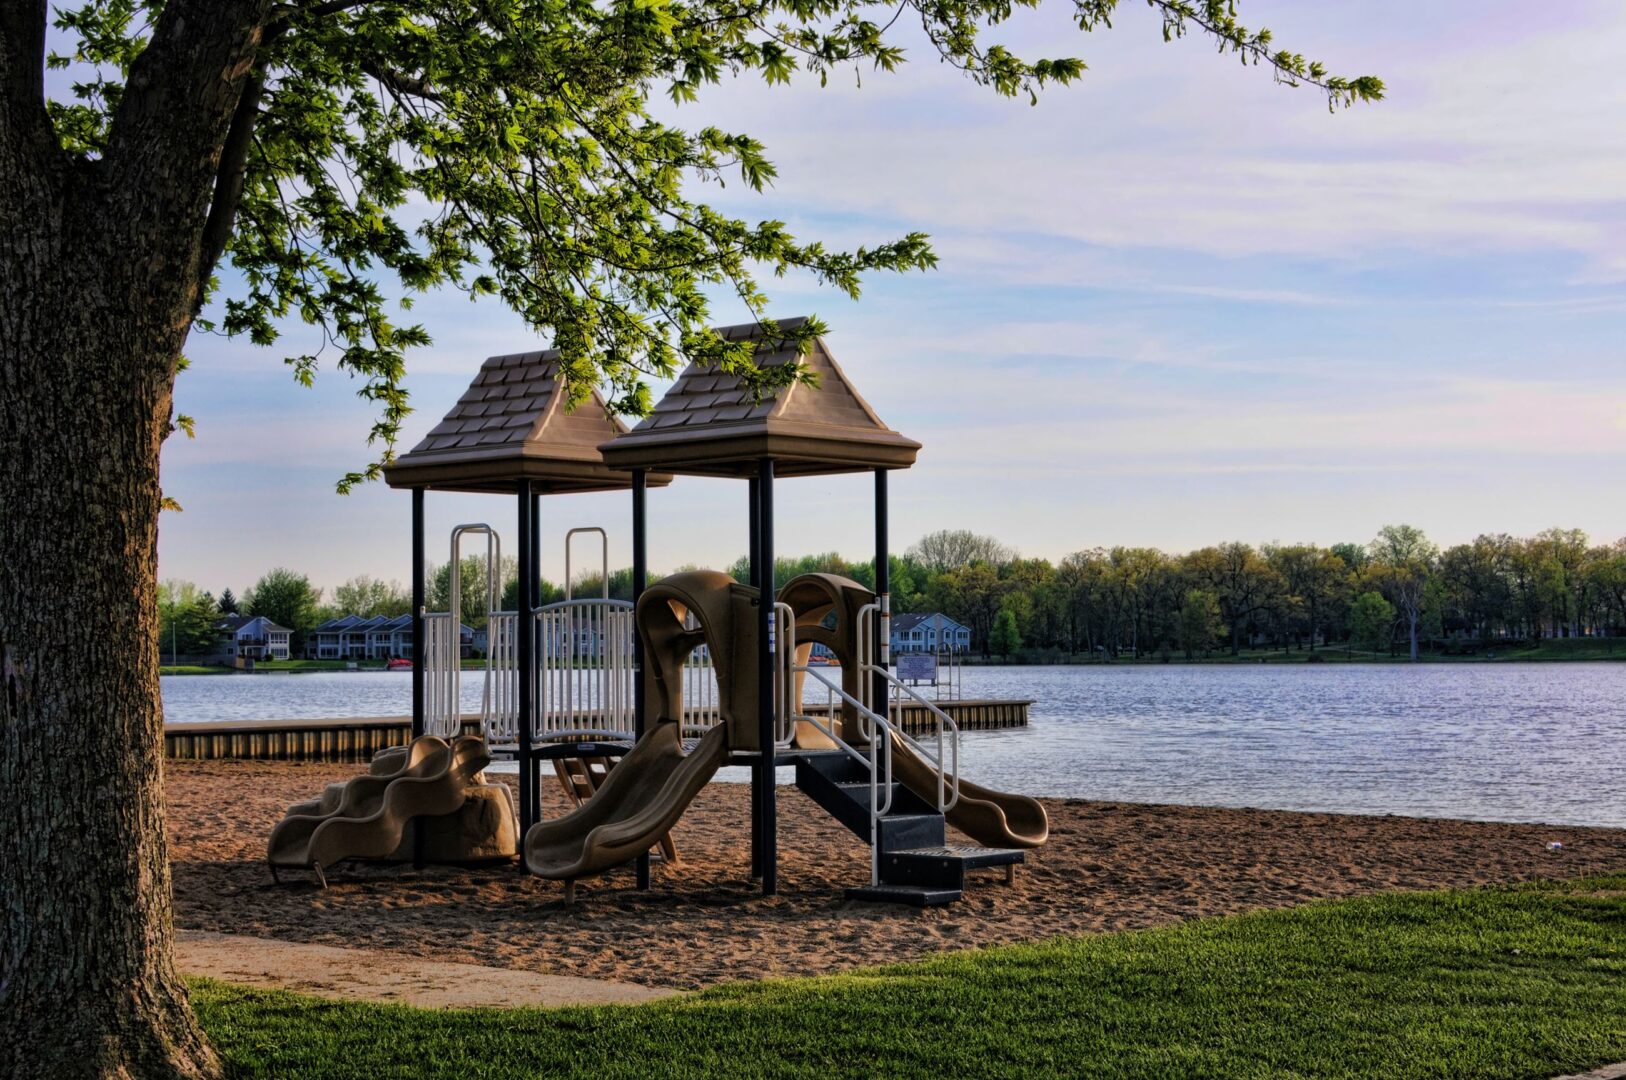 Pike Lake Beach offers playgrounds among other amenities